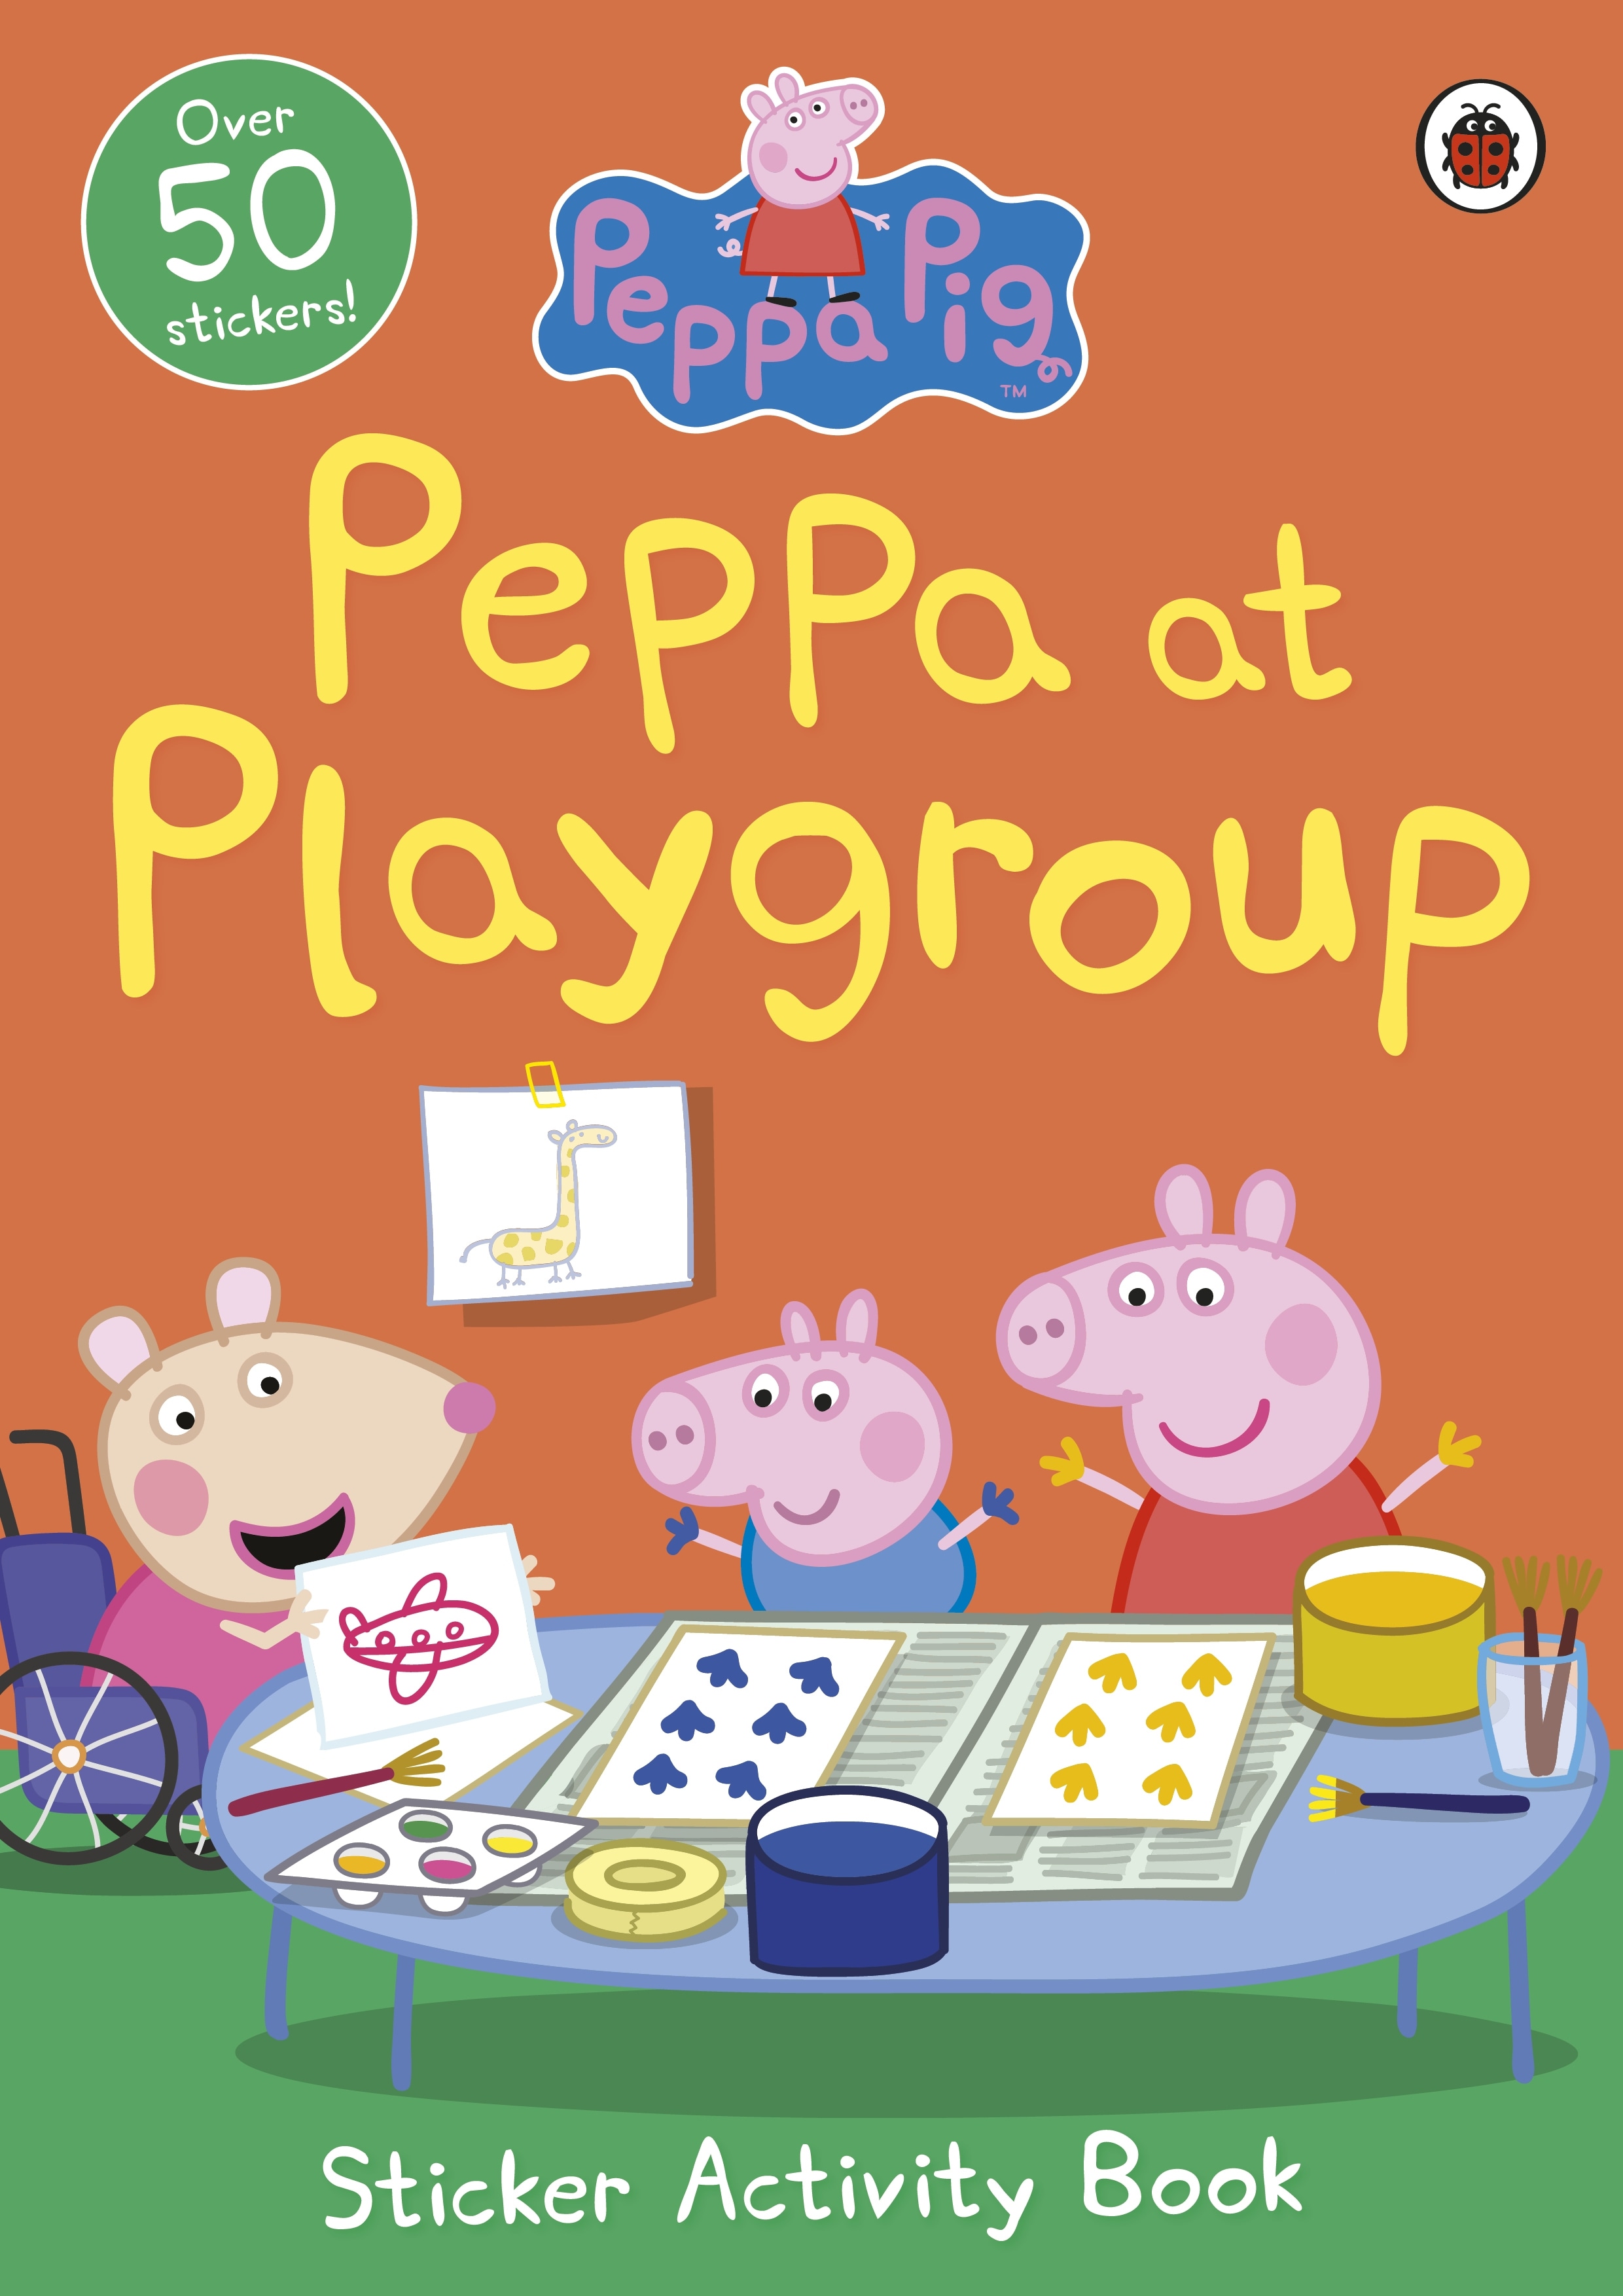 Book “Peppa Pig: Peppa at Playgroup Sticker Activity Book” by Peppa Pig — January 23, 2020